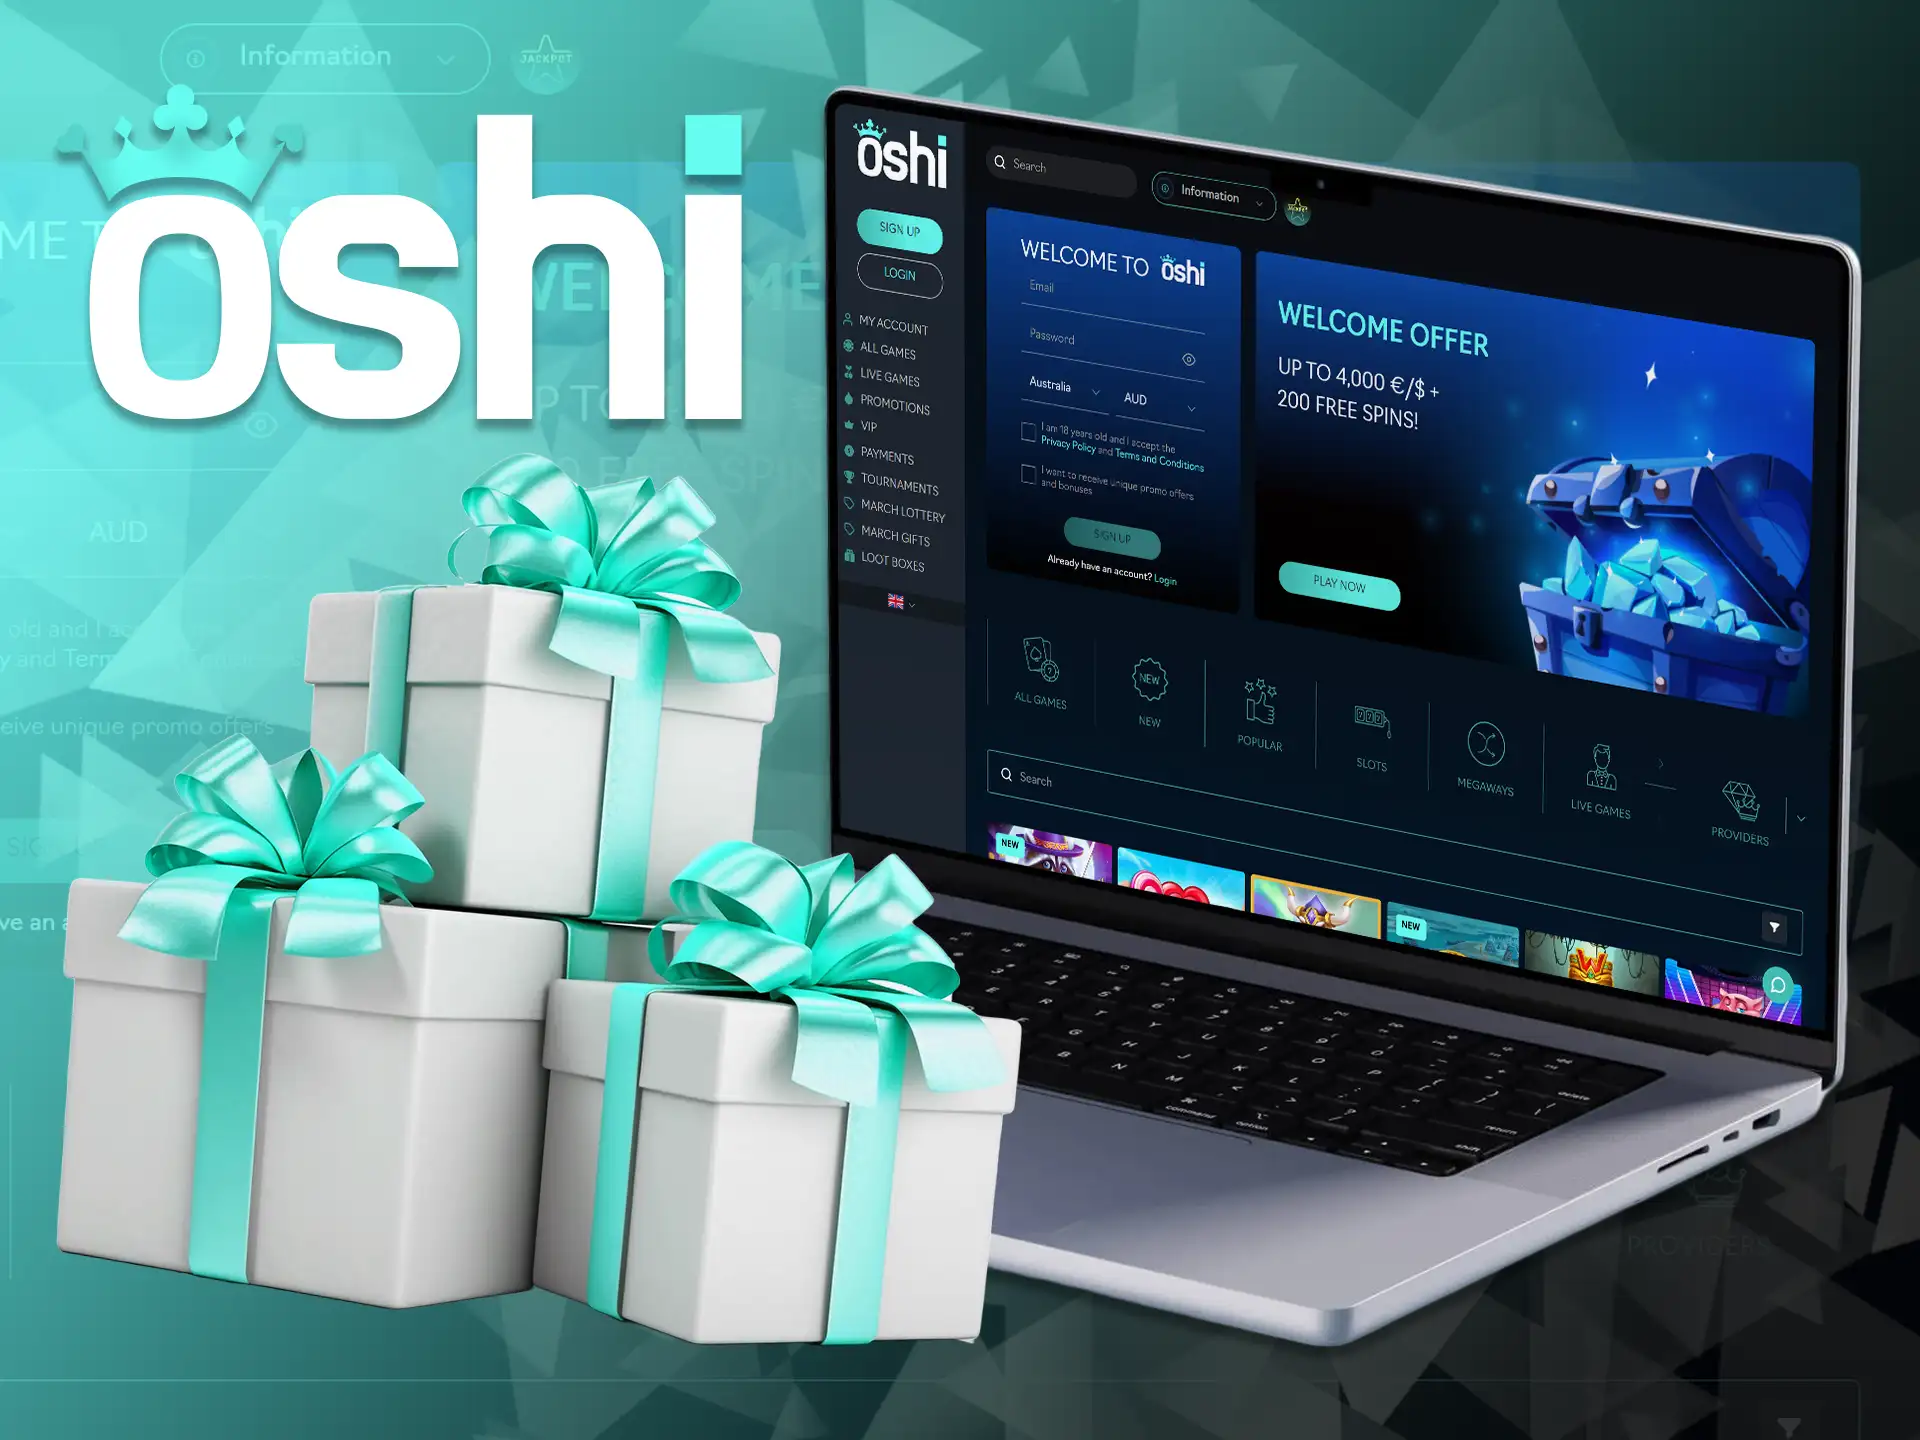 Oshi Online Casino offers a welcome bonus that users can take advantage of.